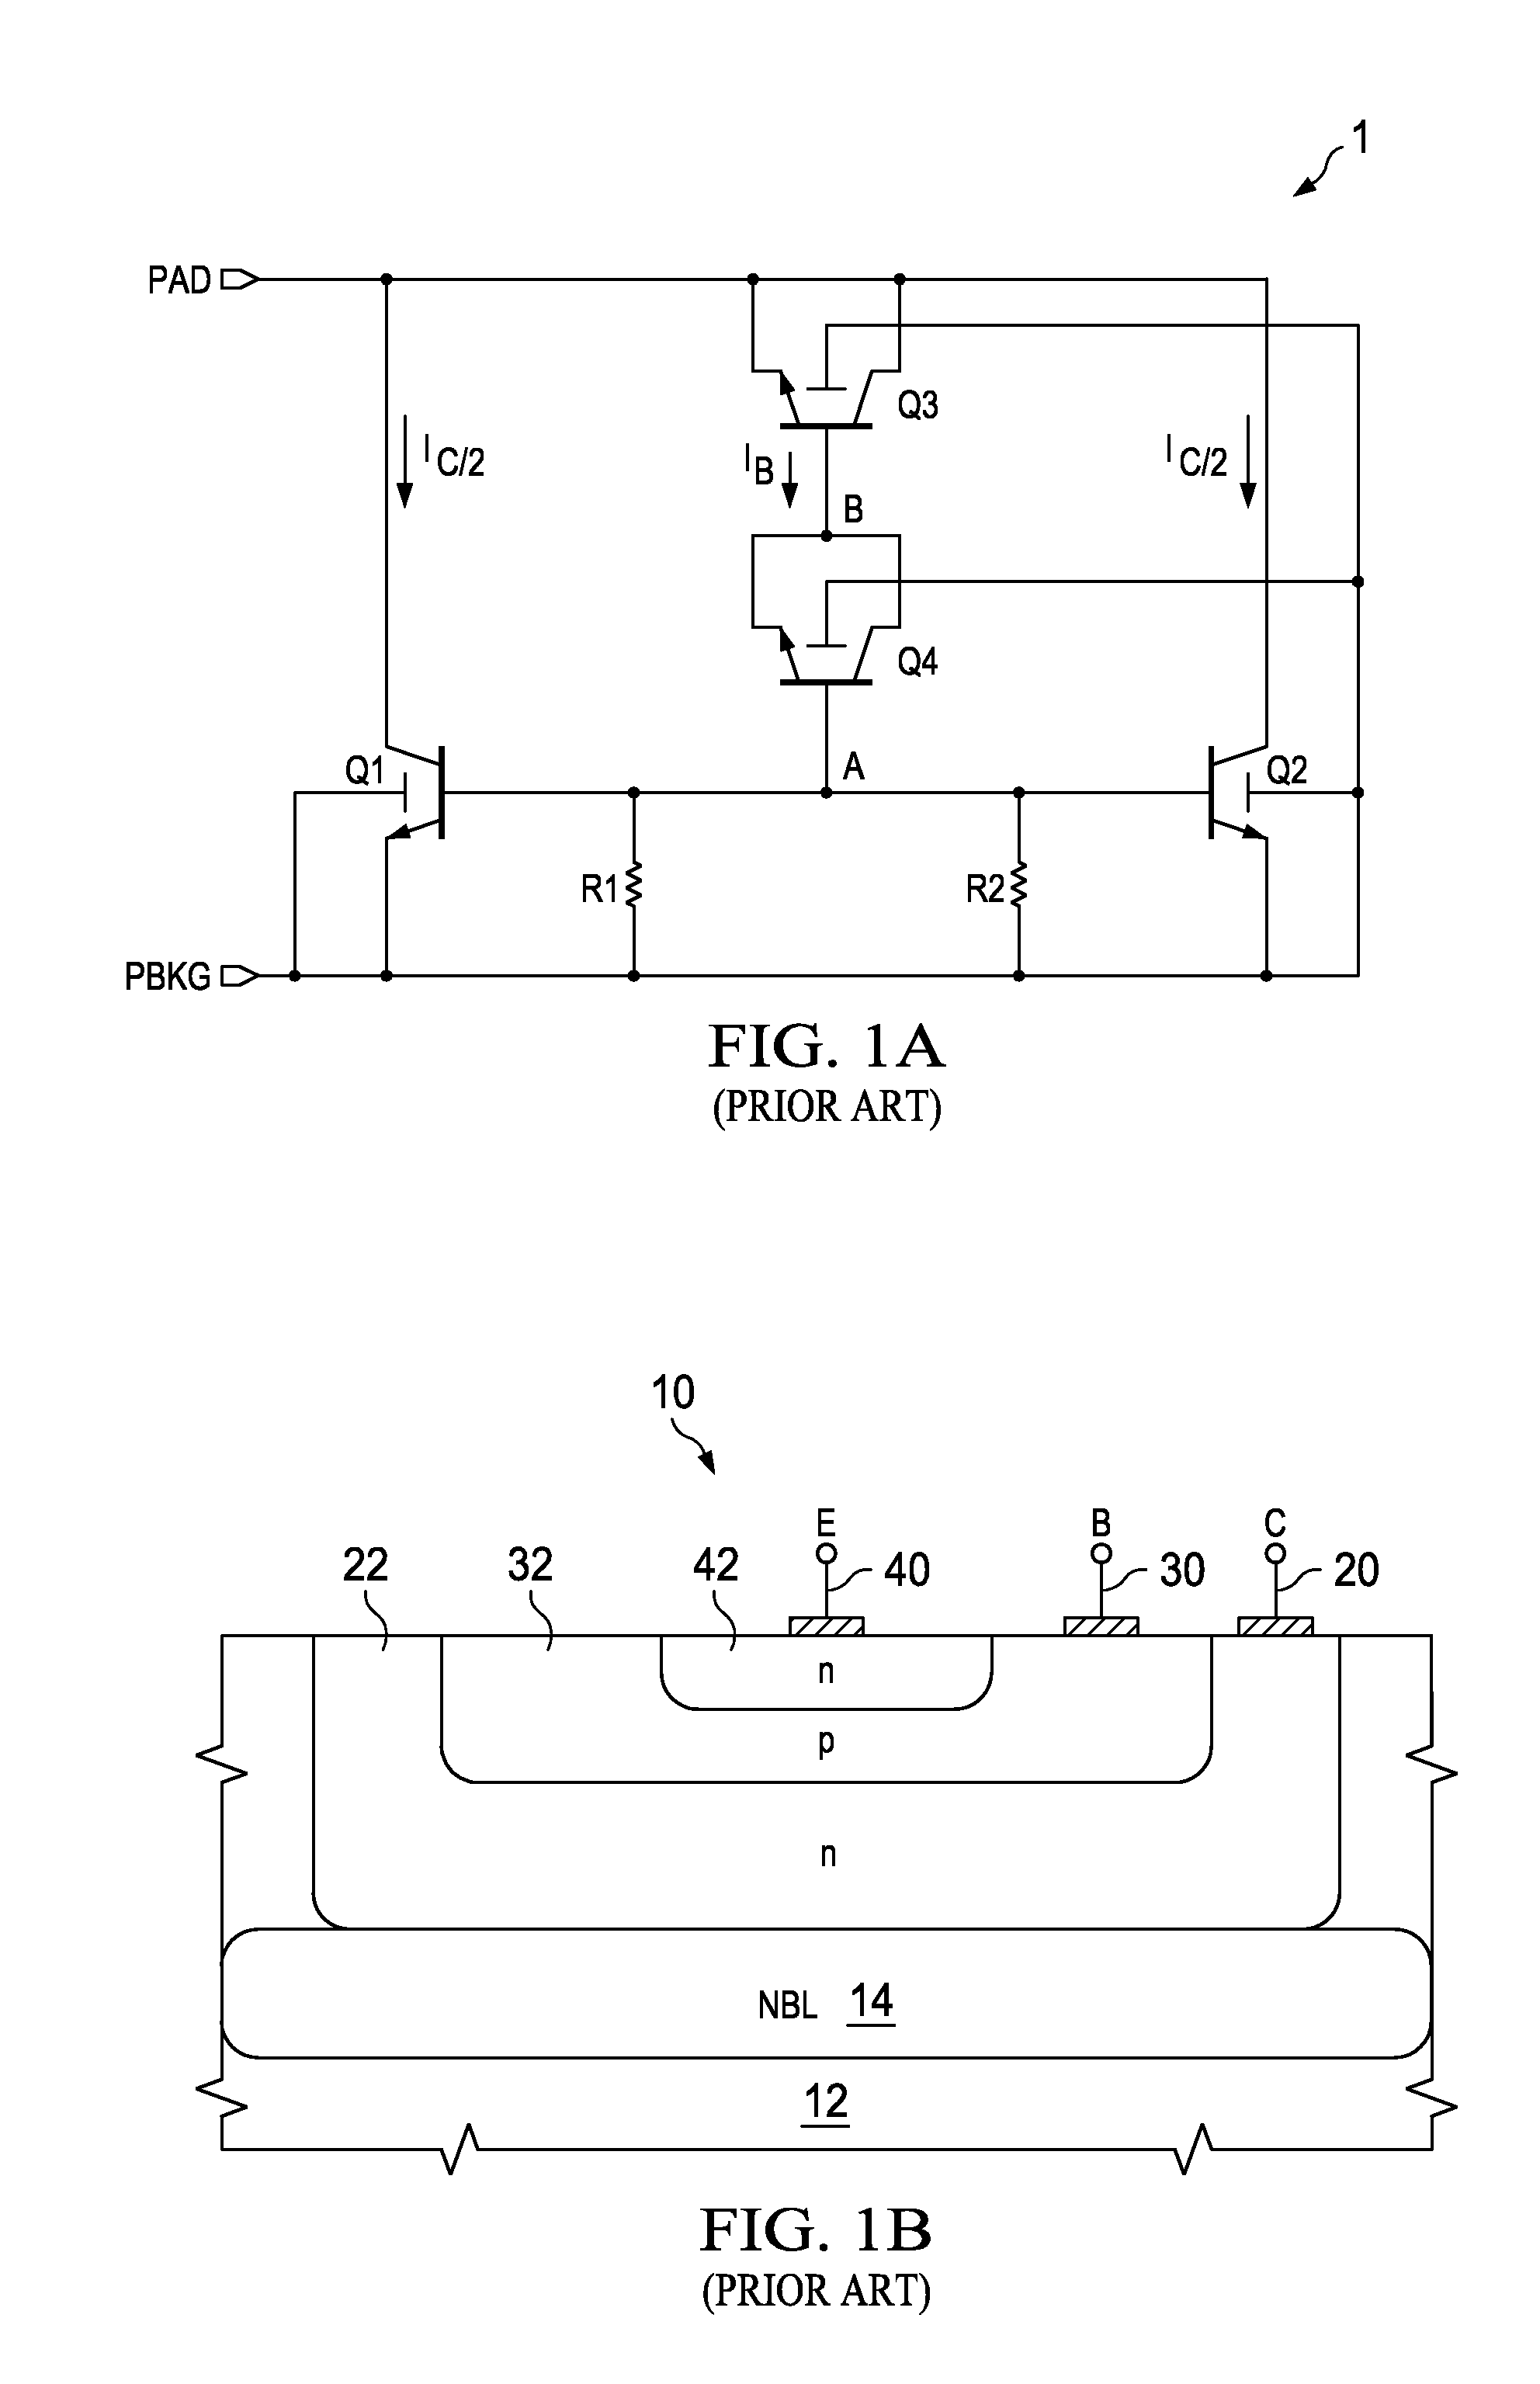 High voltage ESD protection featuring pnp bipolar junction transistor